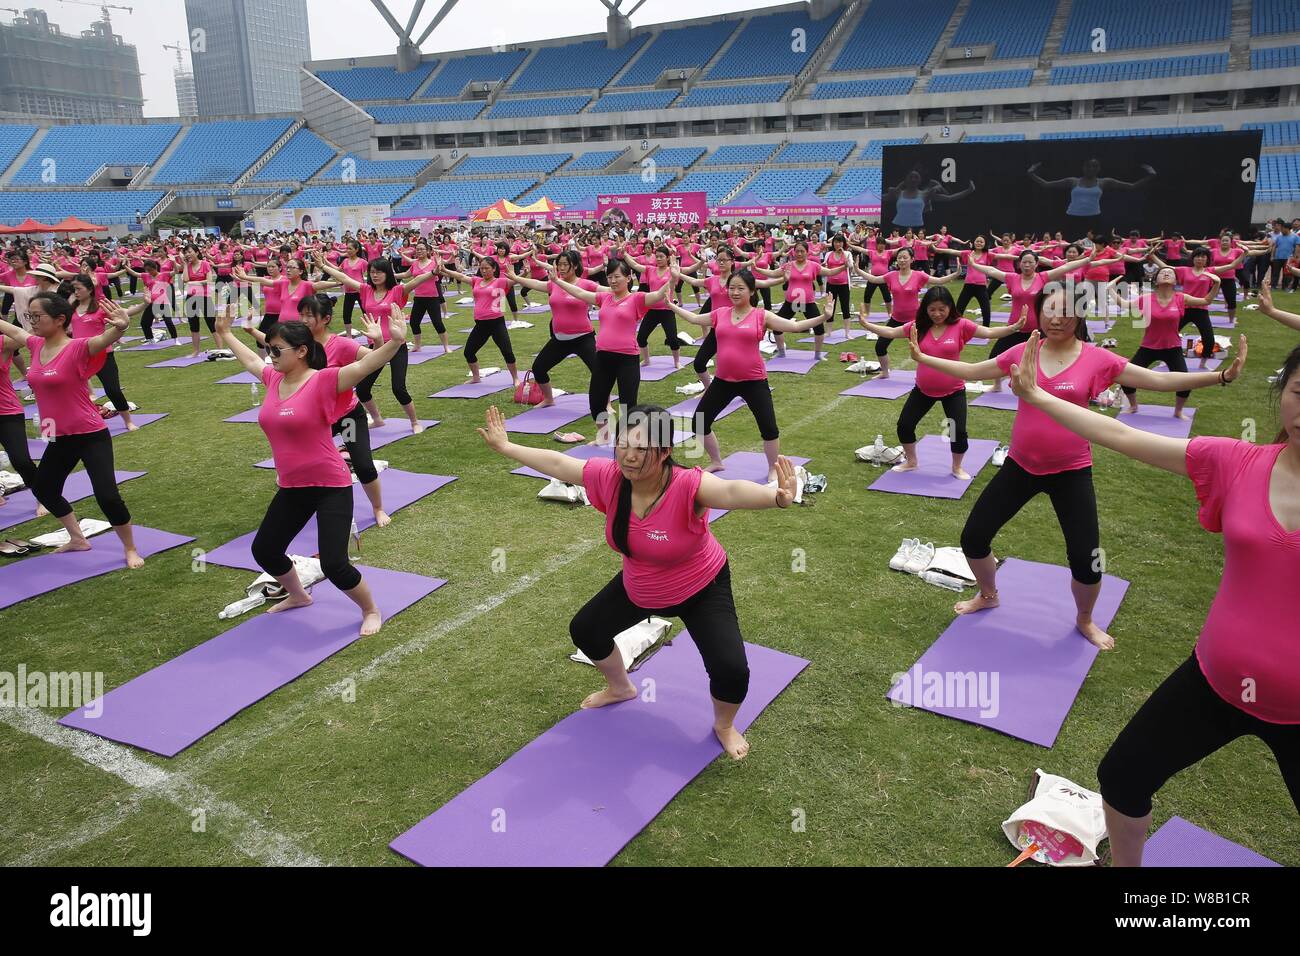 Pregnant women practise yoga to set a new Guinness World Record